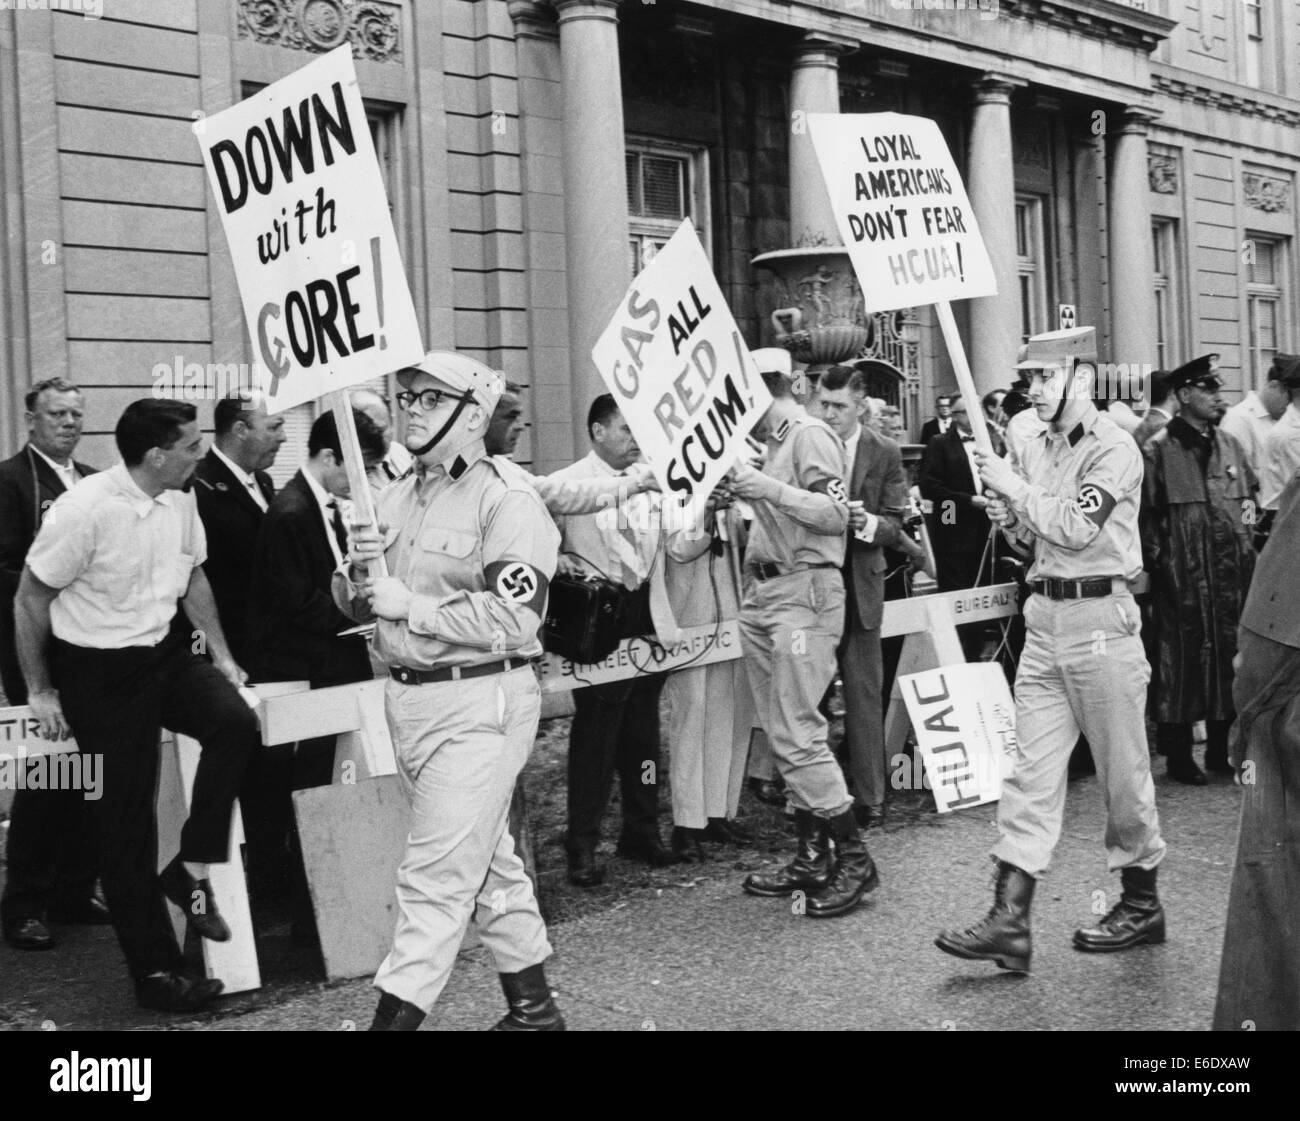 Uniformed Members of American Nazis Staging Own Protest Outside Hearing Room of the House Un-American Activities Committee, Stock Photo